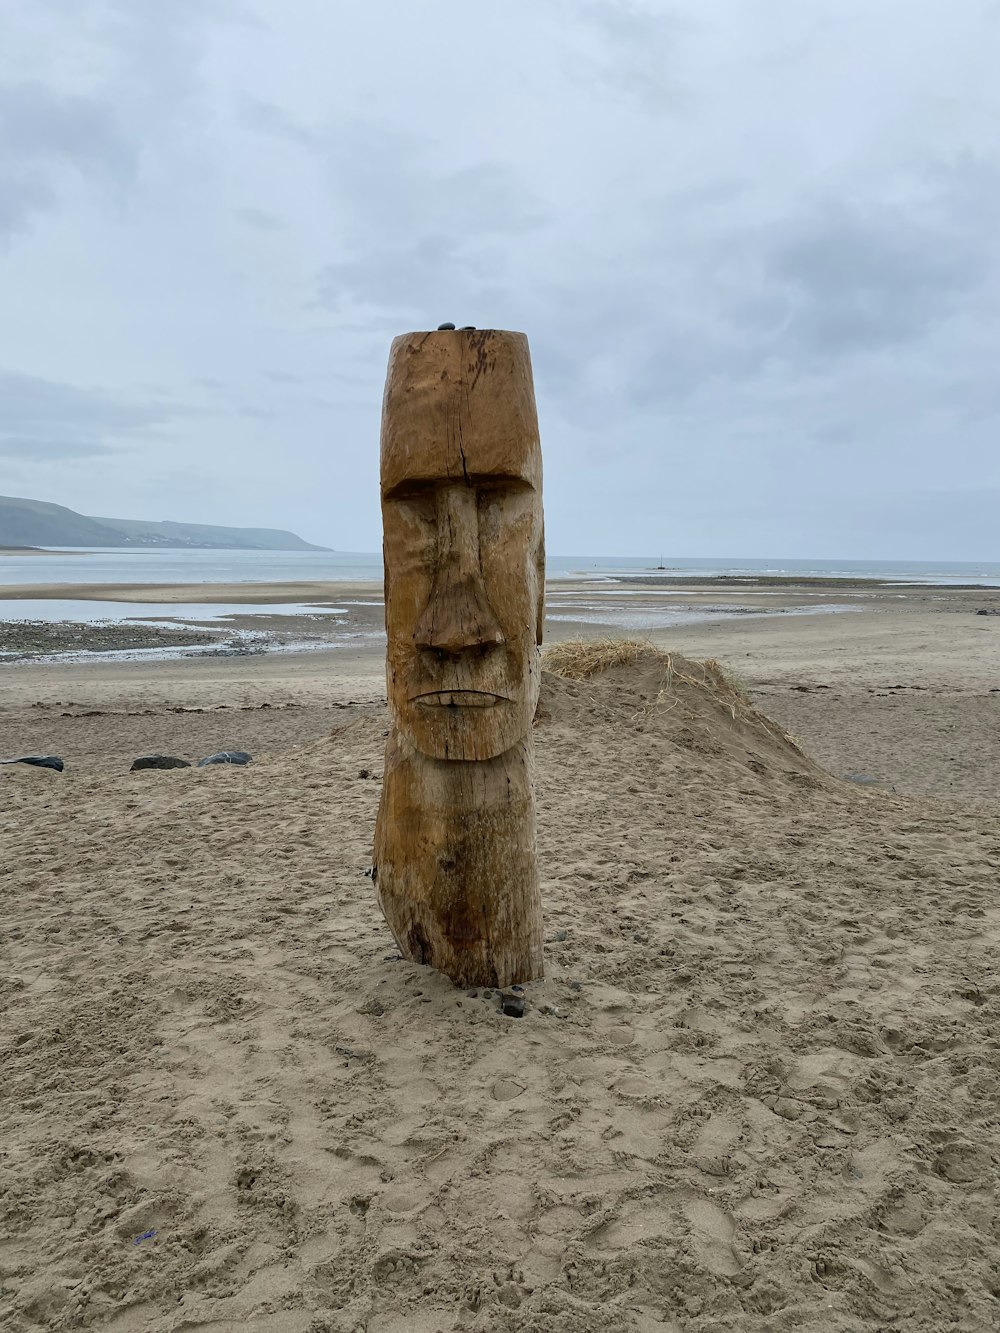 a large wooden statue sitting on top of a sandy beach